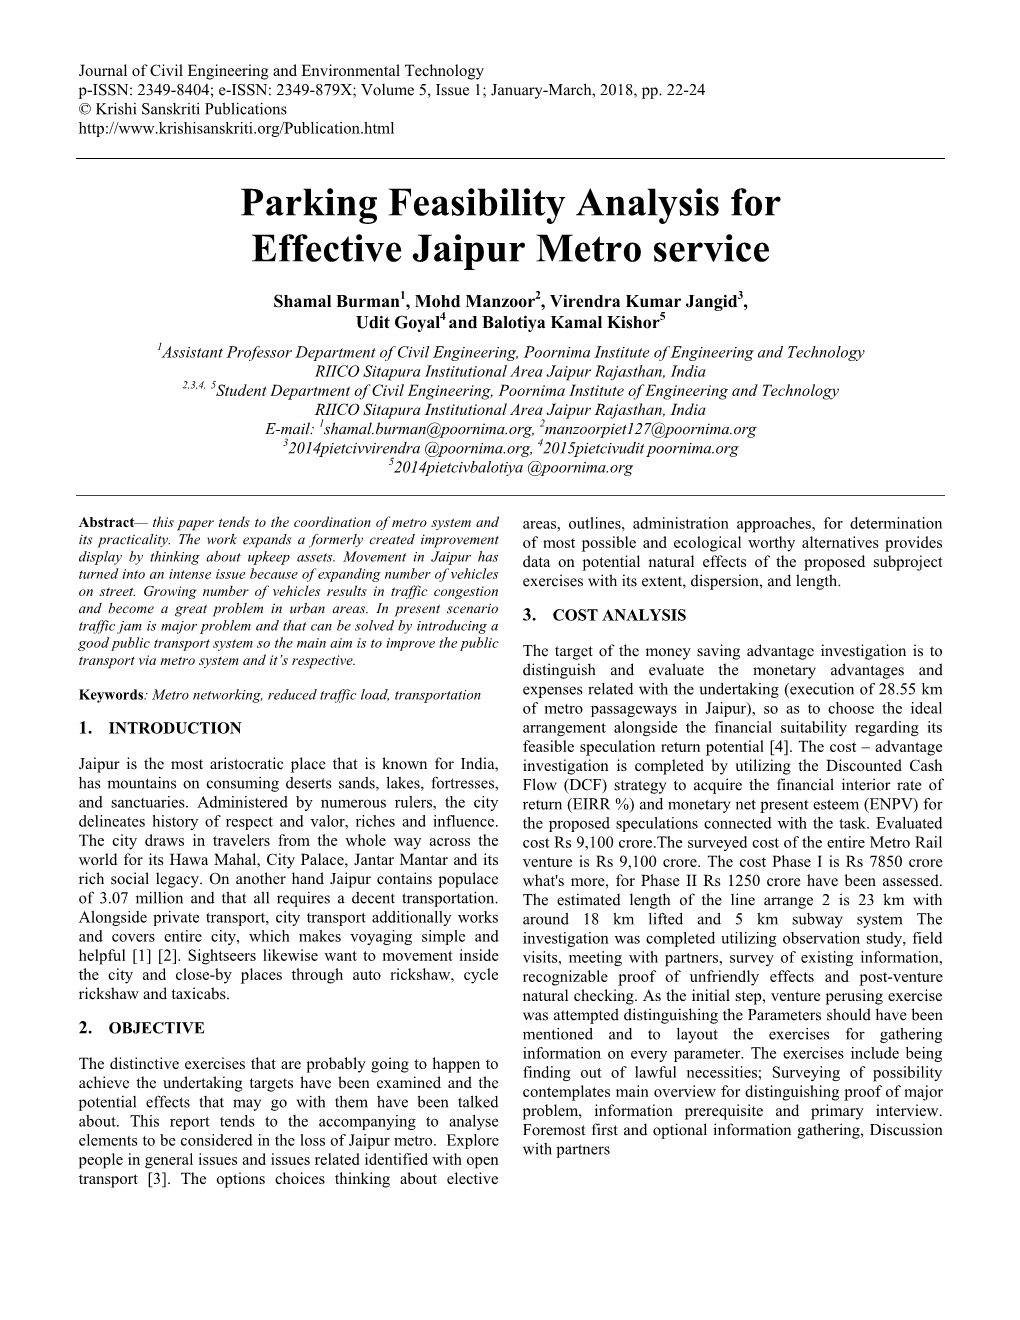 Parking Feasibility Analysis for Effective Jaipur Metro Service